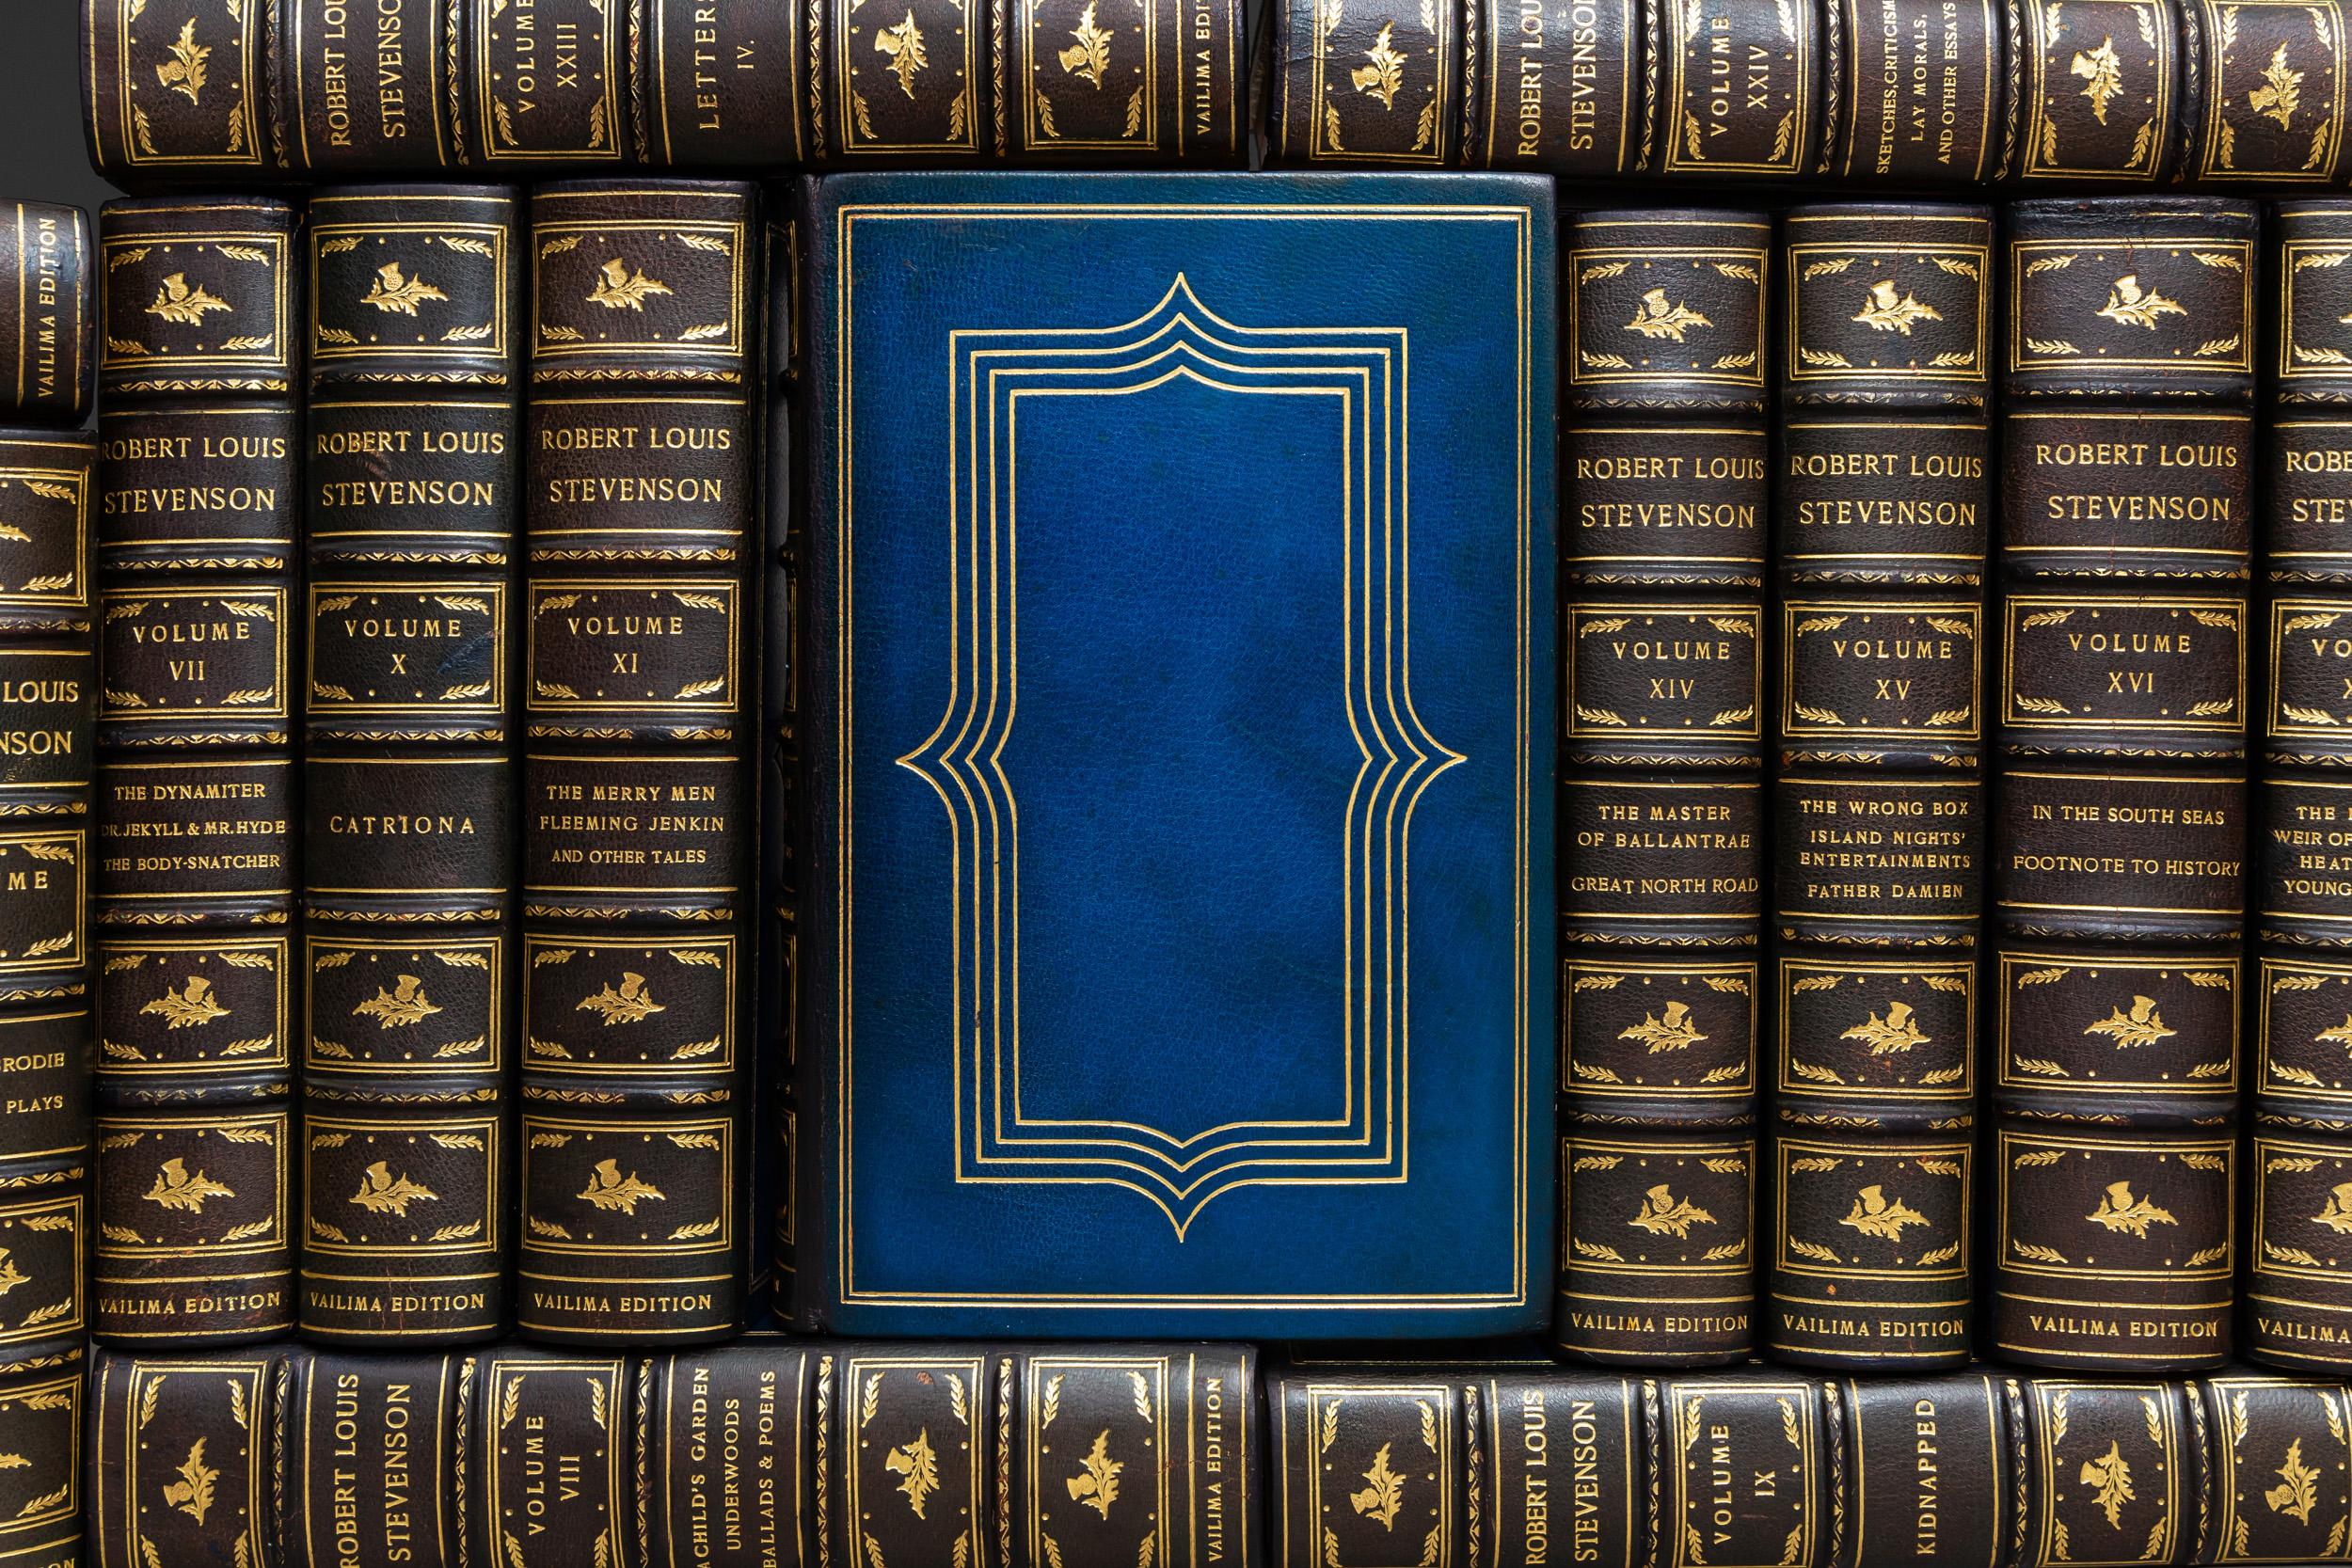 20 Volumes. Bryant, Cranch, Longfellow & Taylor. The Classics (Divine Comedy, Iliad and Odyssey, Virgil, Dante, Faust, Virgil). 

Bound in full blue Morocco with silk and leather doublers, top edges gilt, raised bands, ornate gilt on
covers and